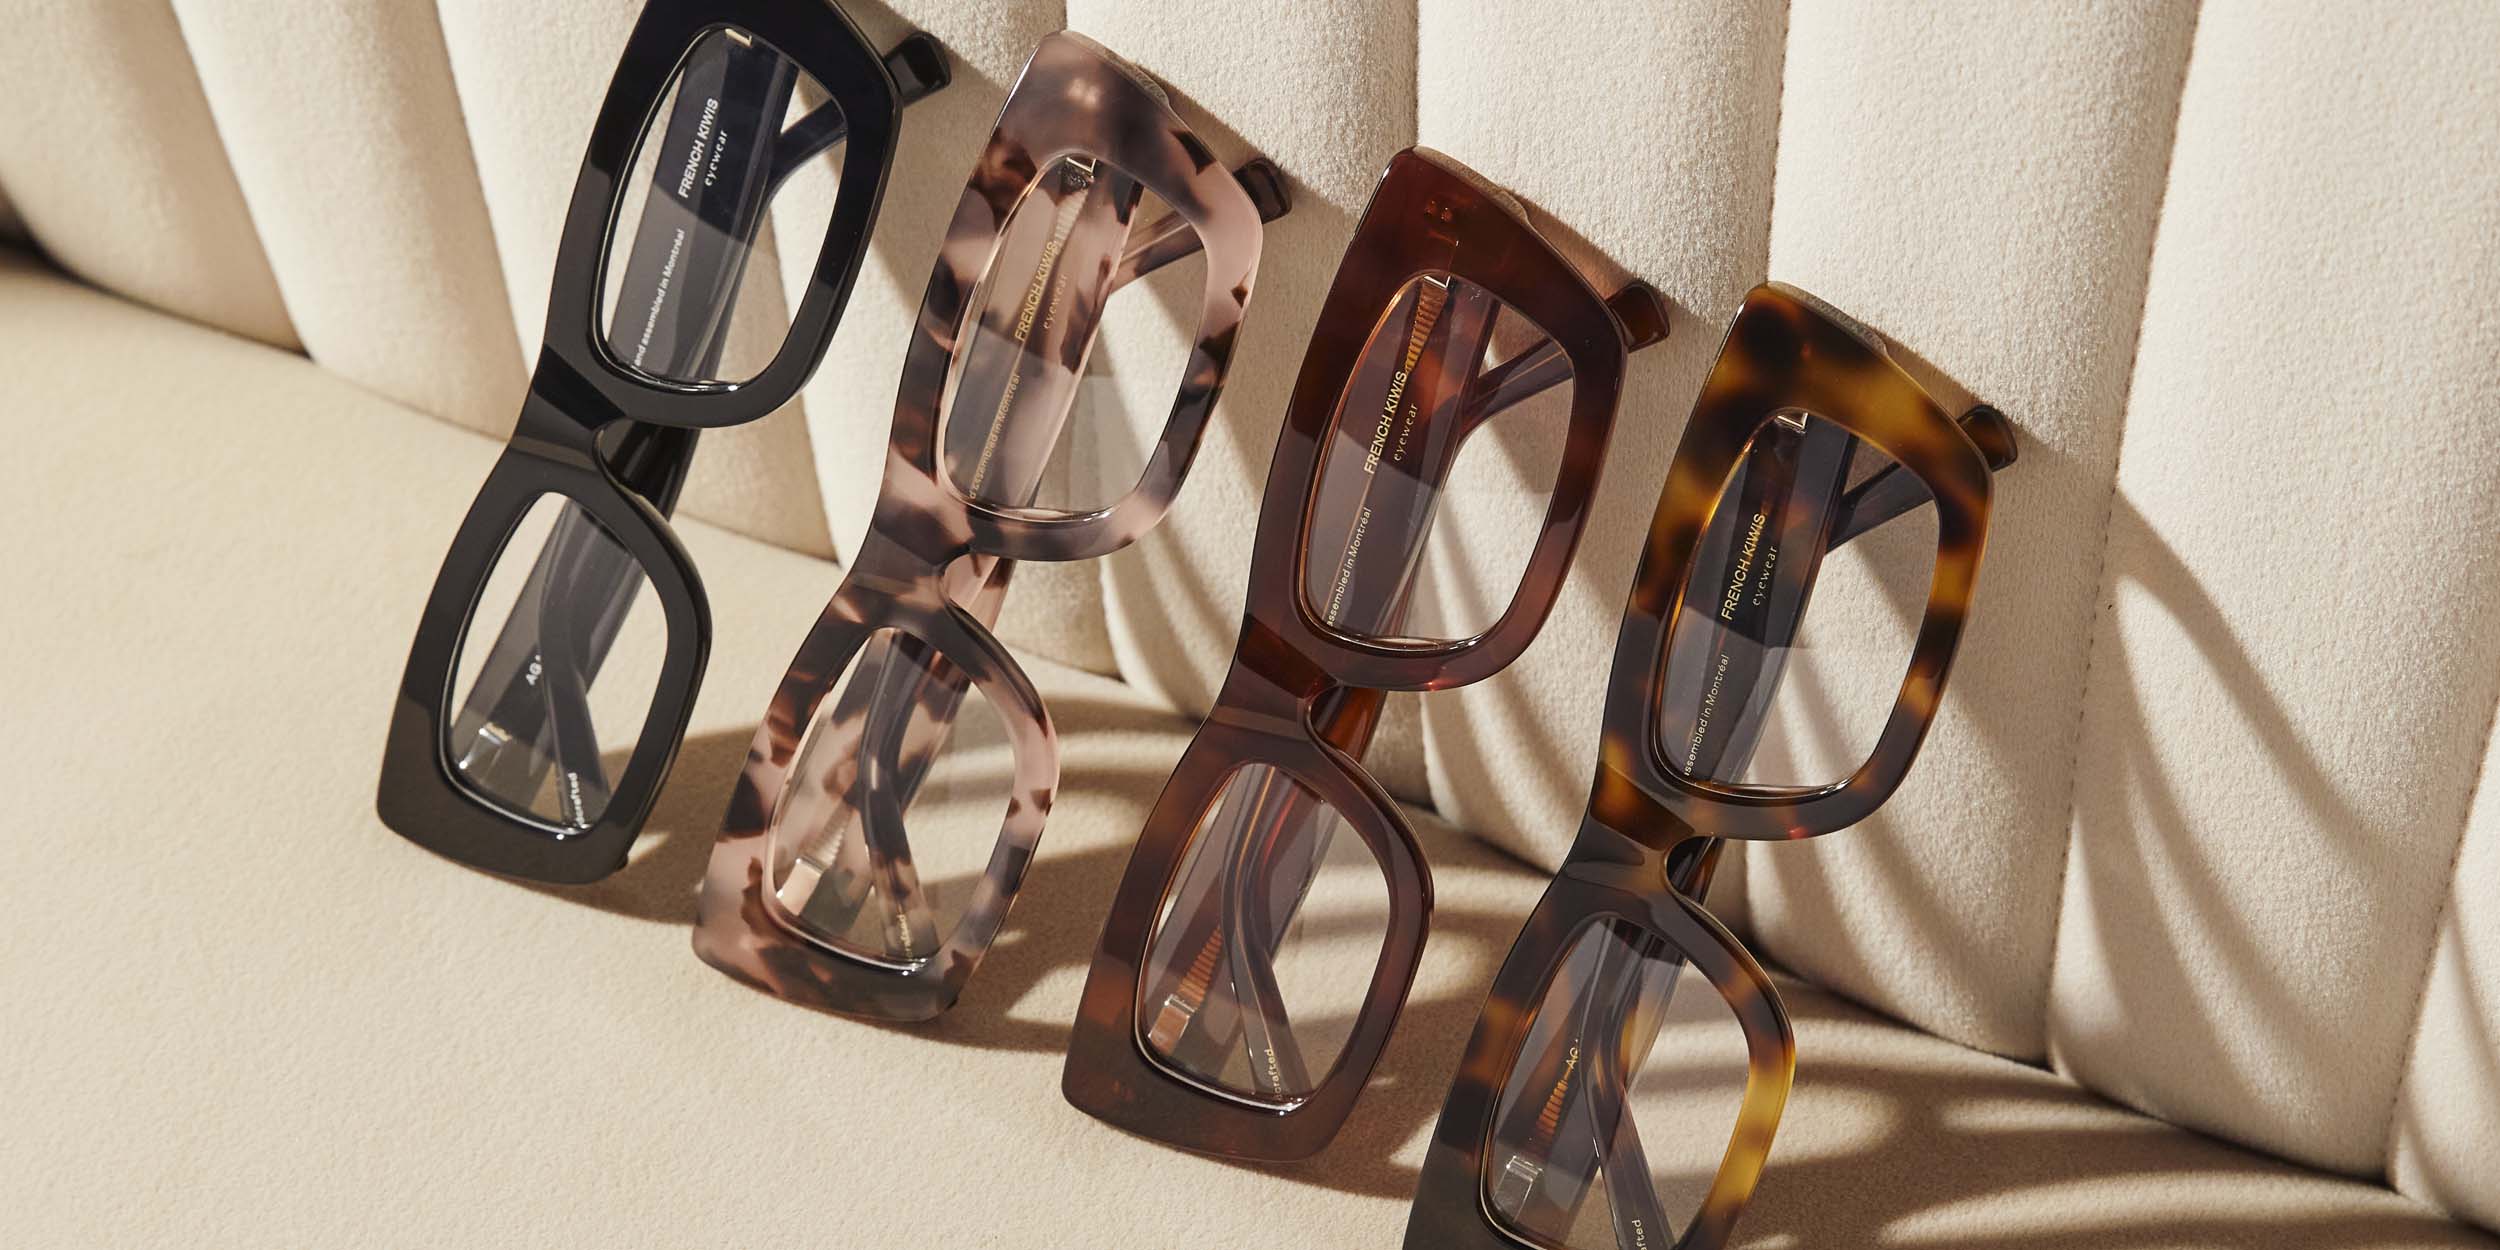 Photo Details of Agathe Creme Reading Glasses in a room